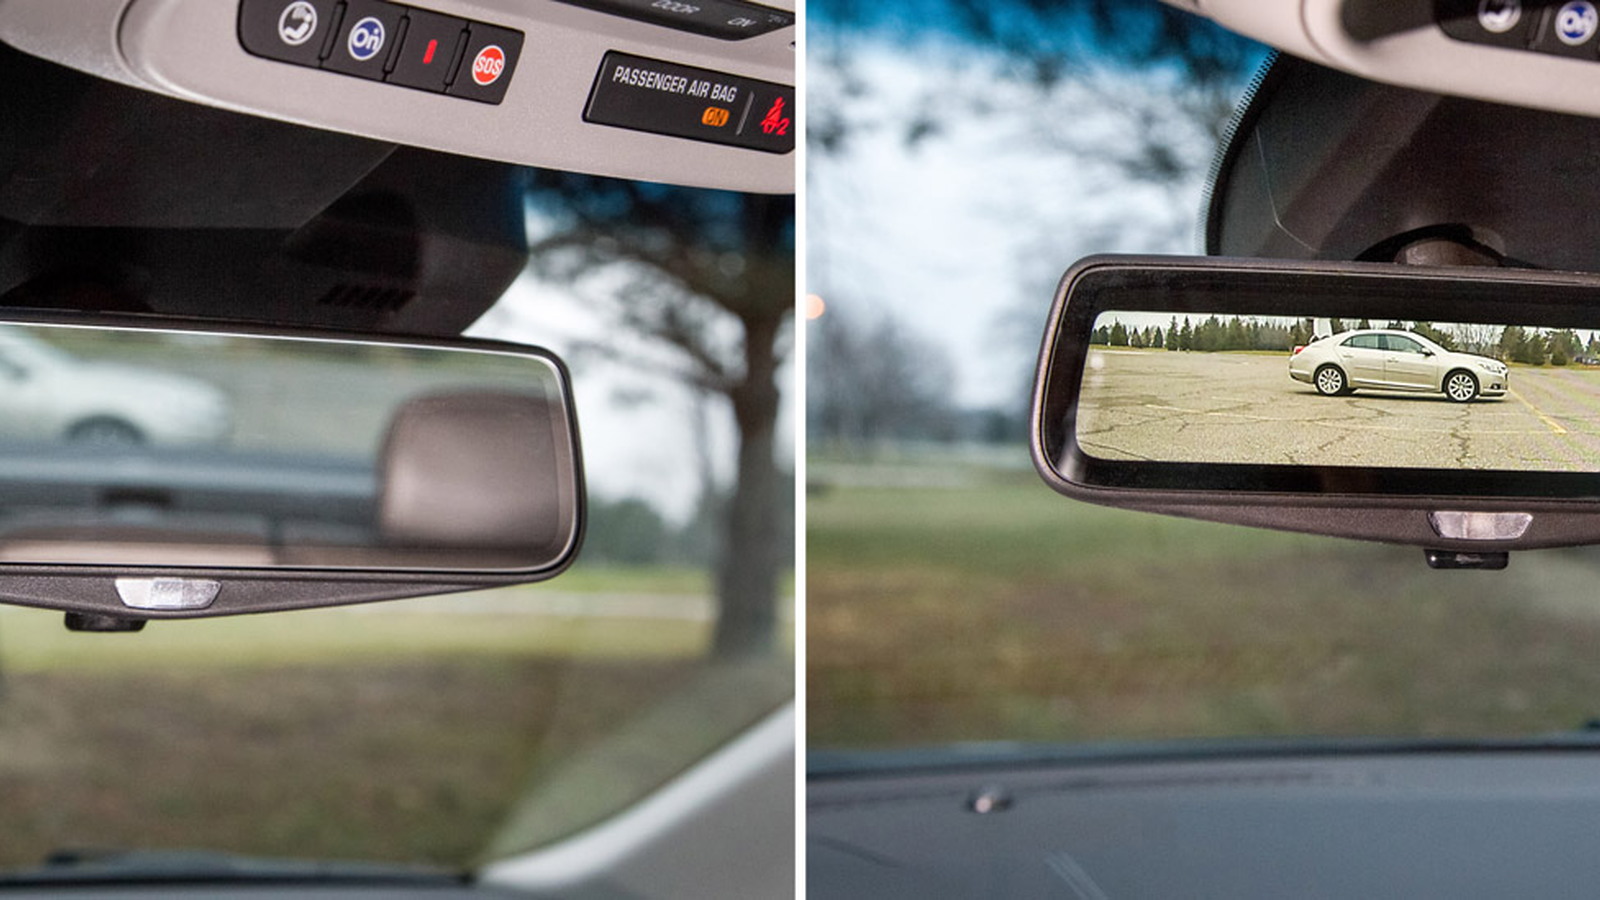 Streaming video rearview mirror from the 2016 Cadillac CT6